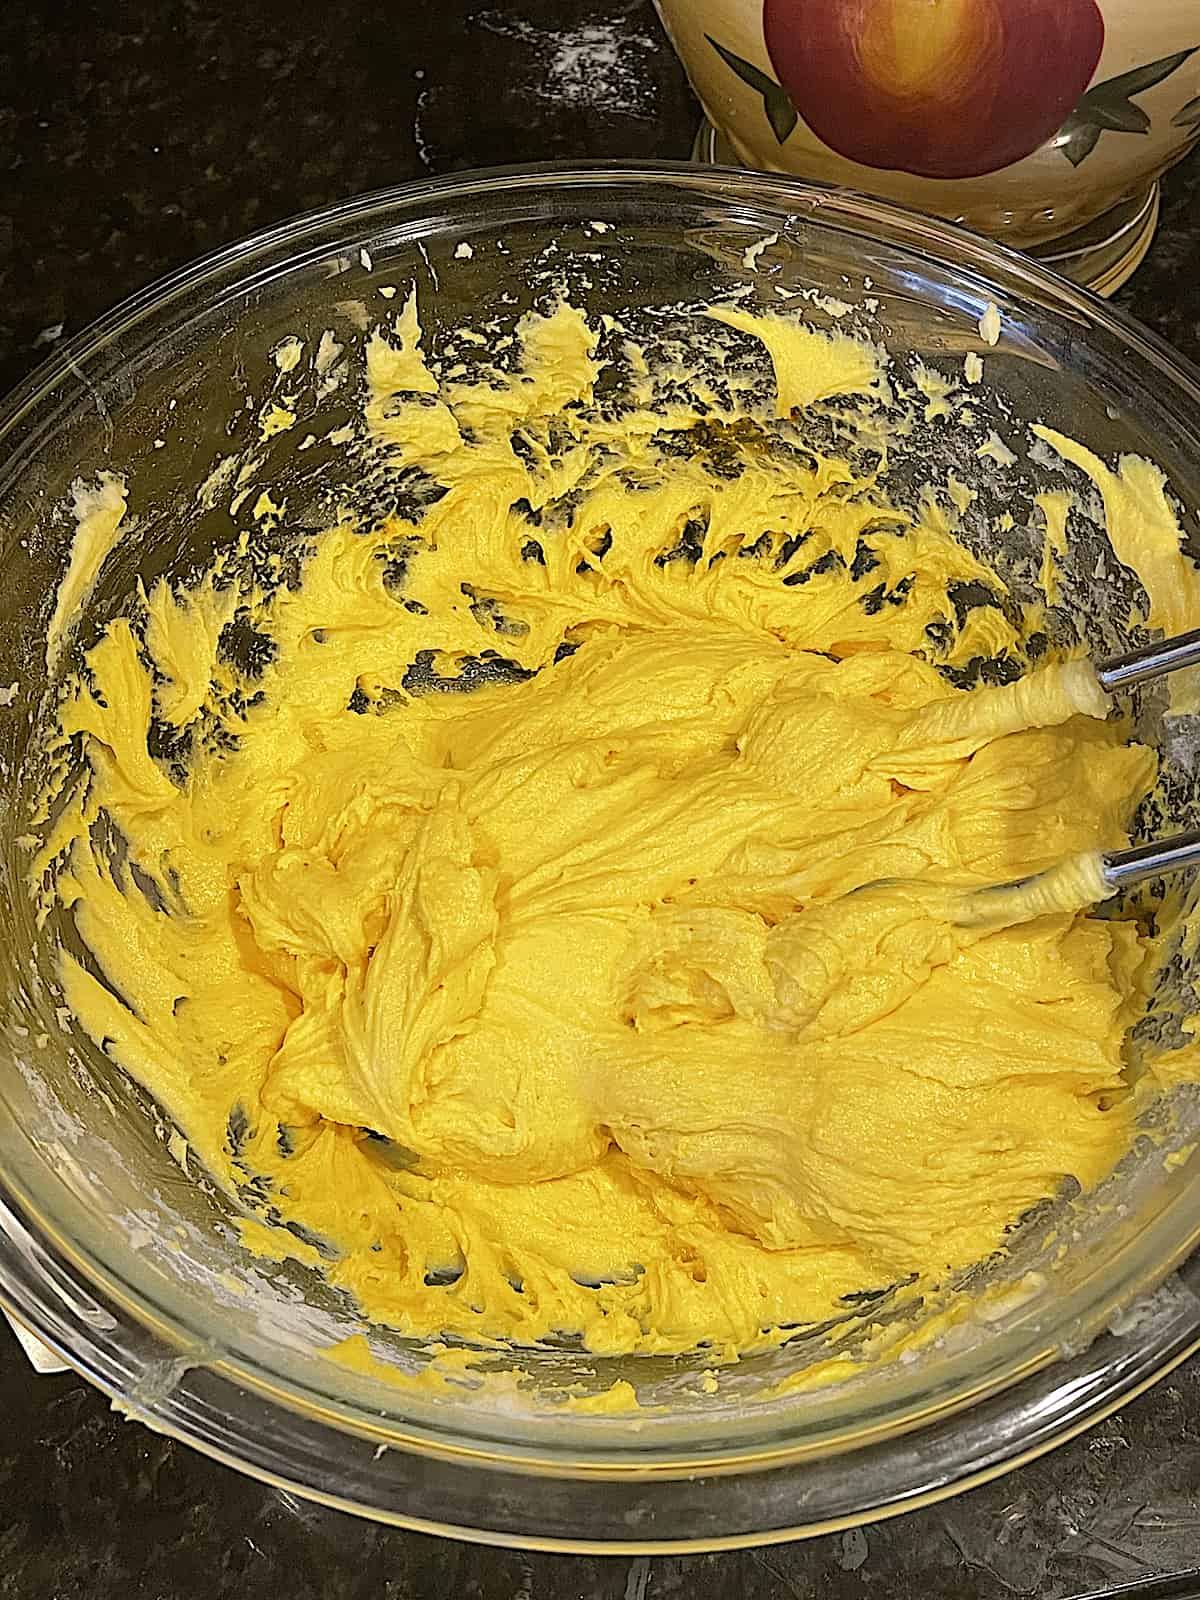 lemon cookie batter dyed yellow in a mixing bowl